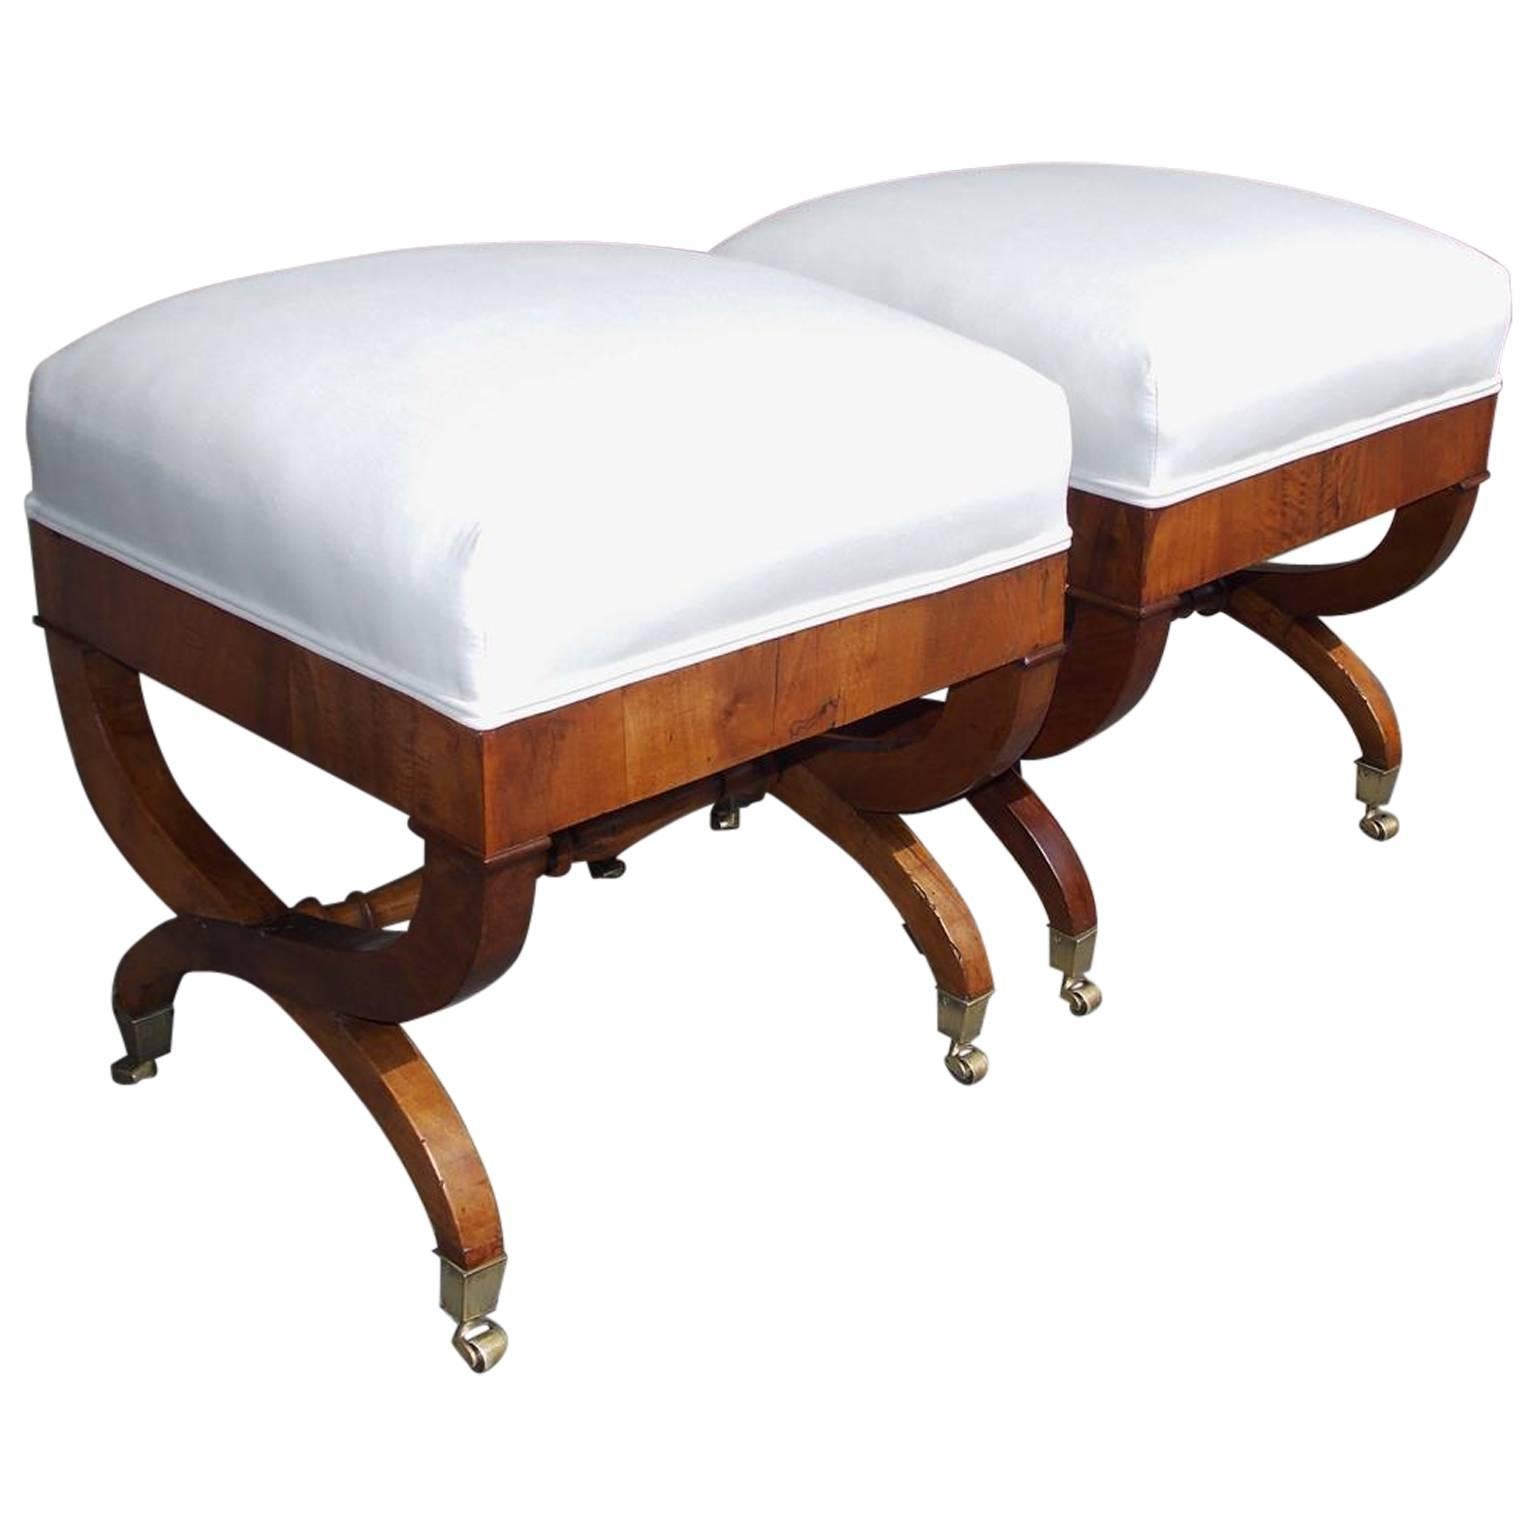 Pair of English Walnut Crule Fire Side Benches, Circa 1810